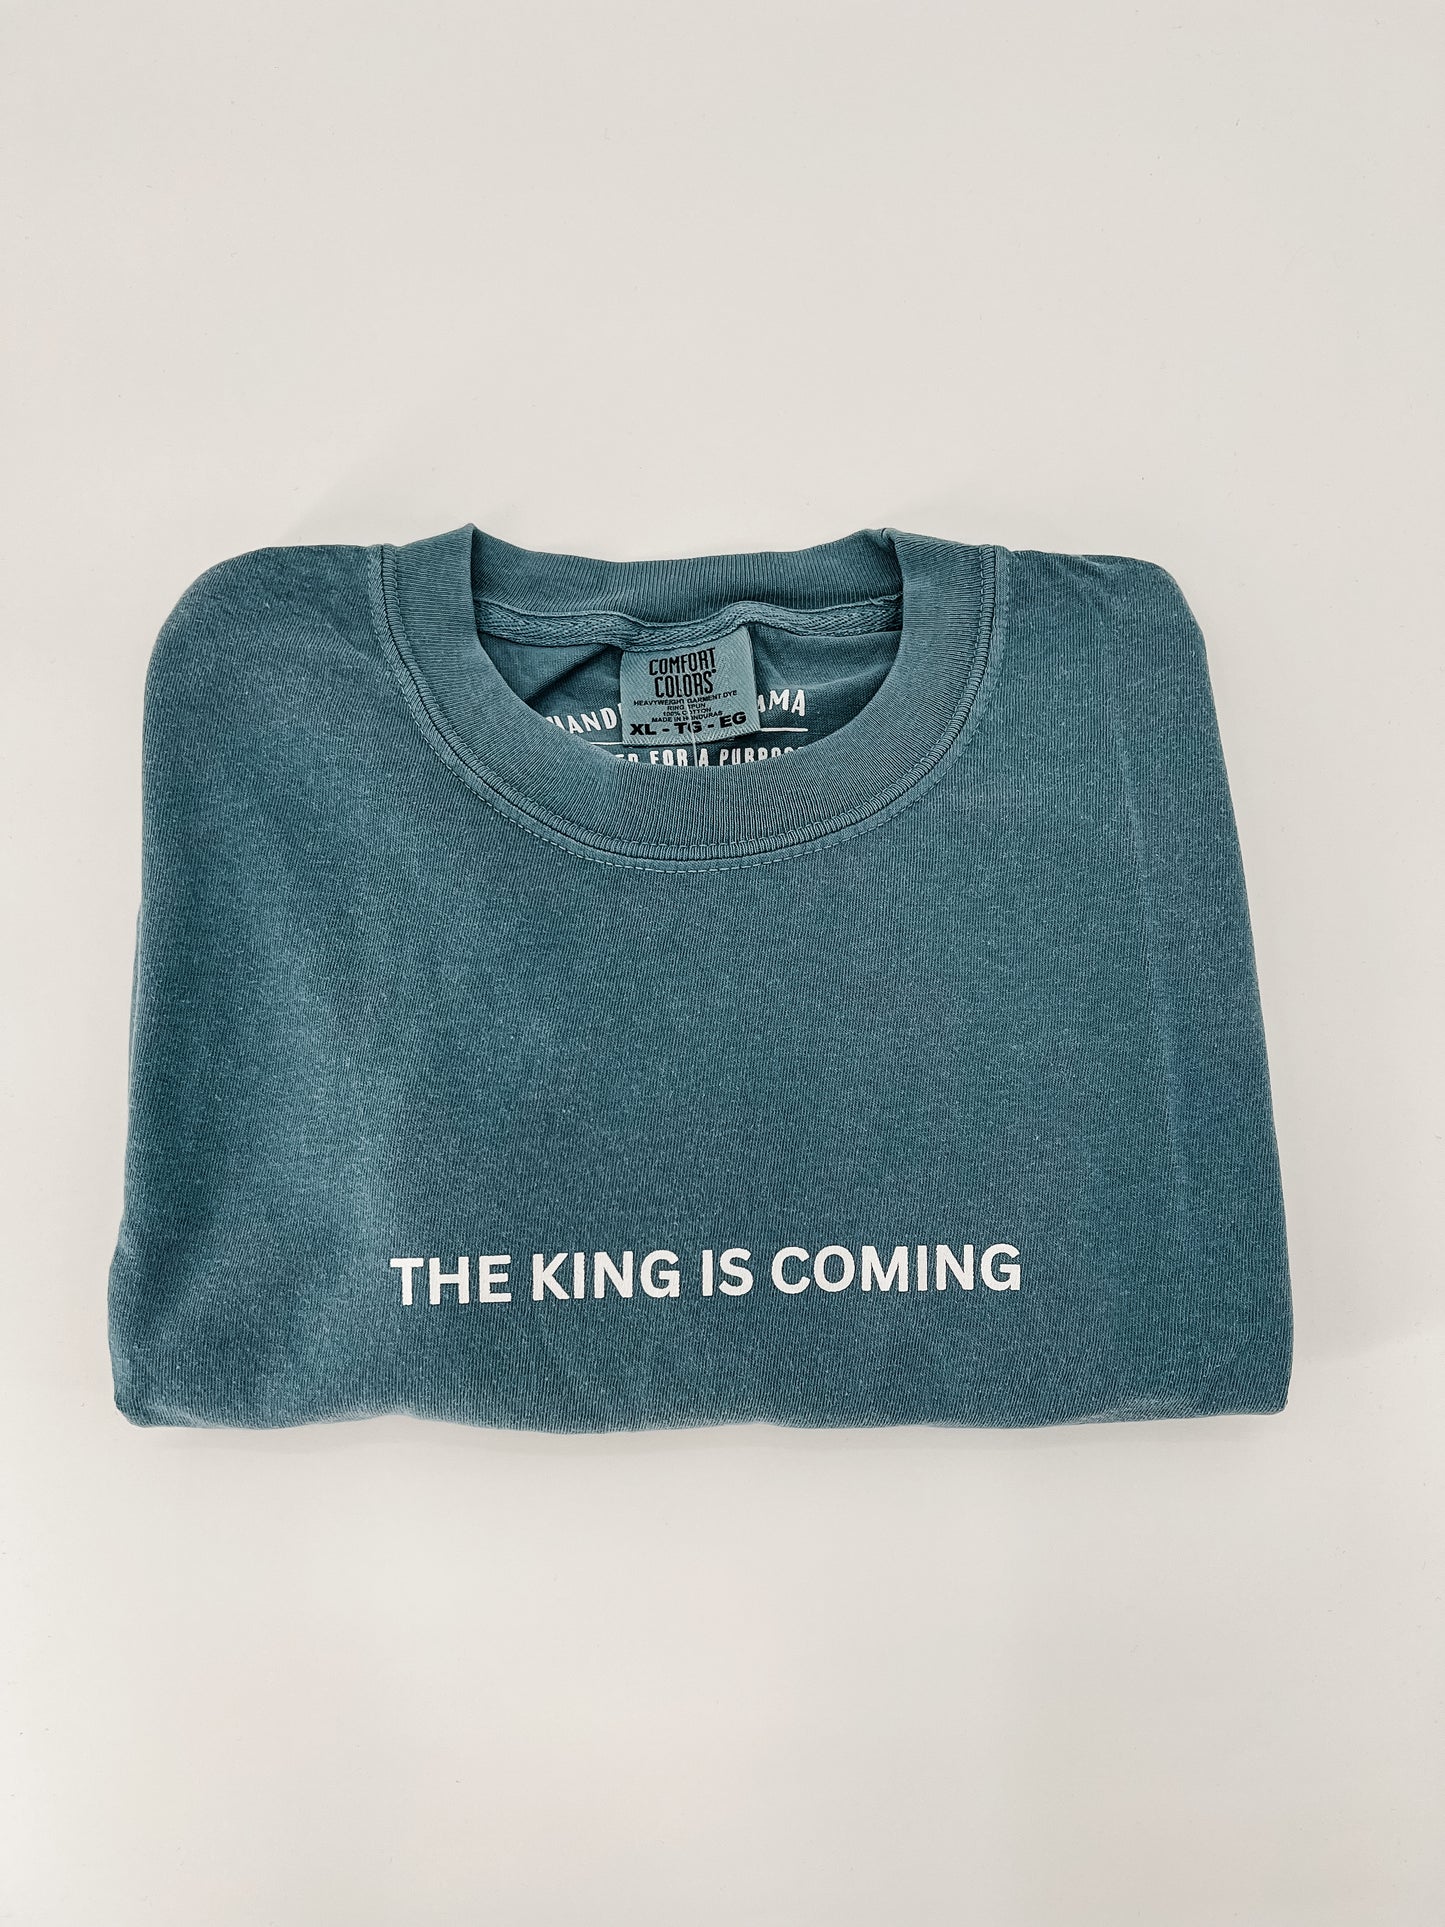 The King is Coming Tee